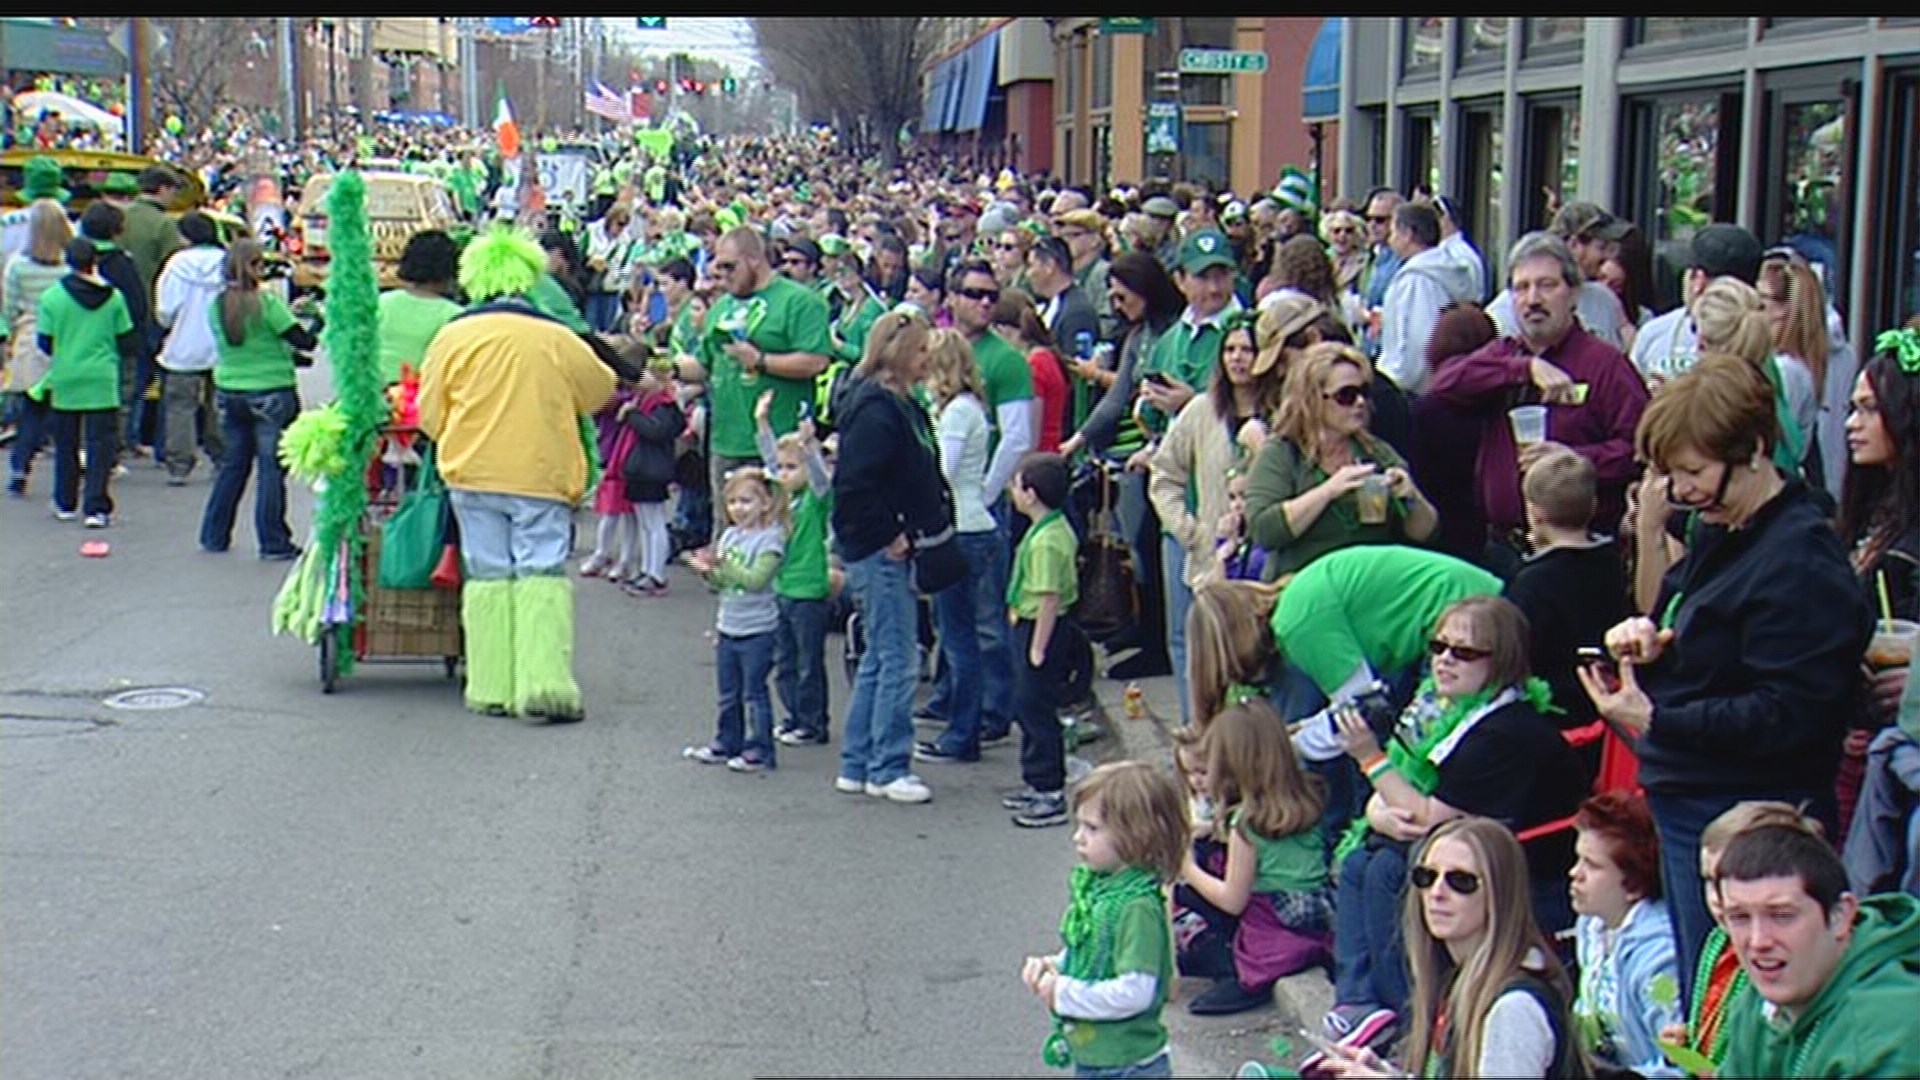 The Highlands go green for annual St. Patrick's Day Parade